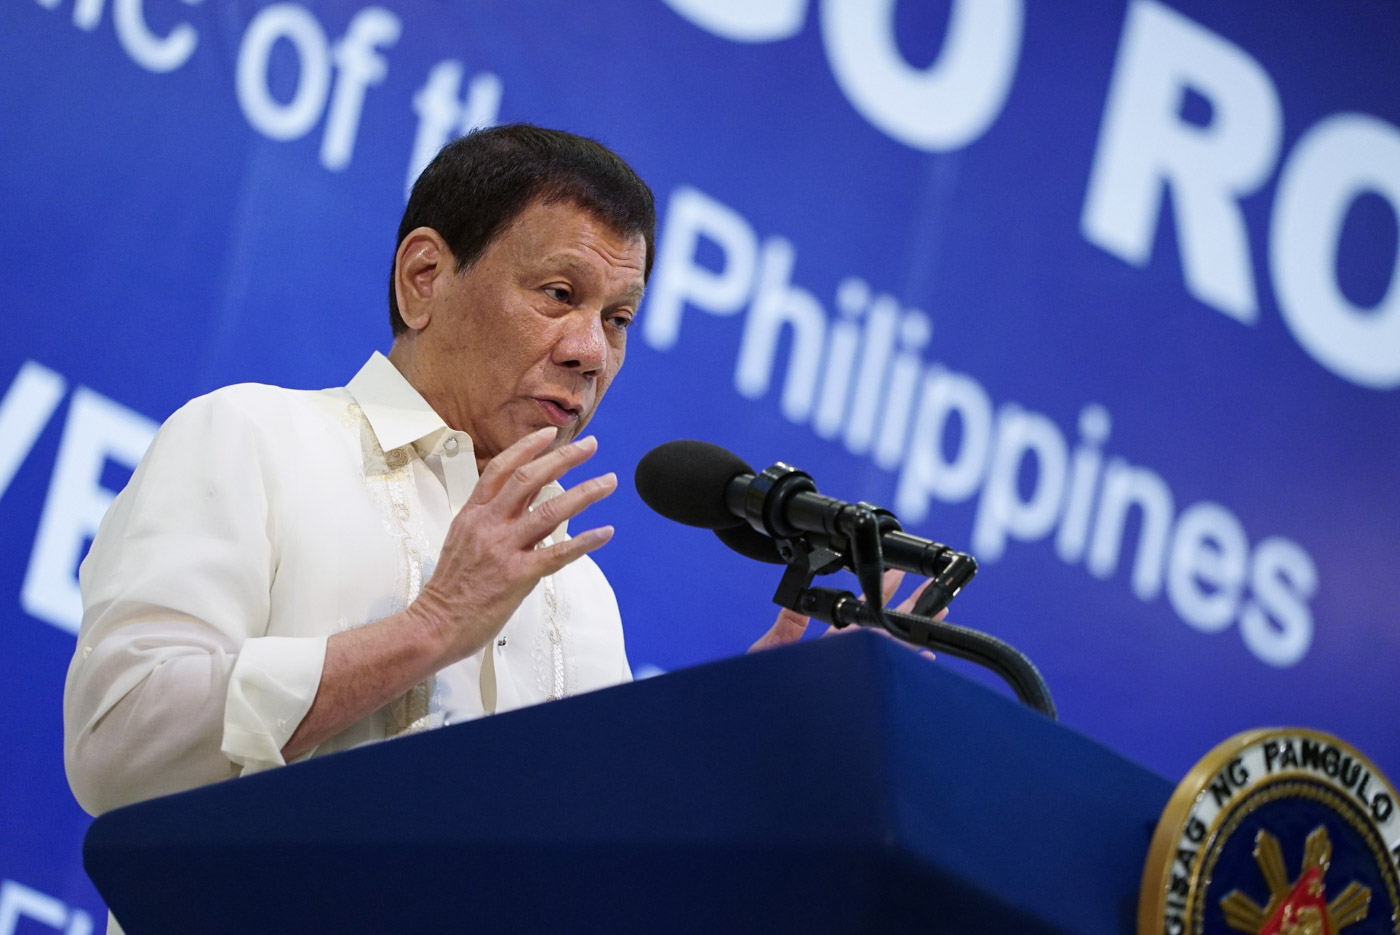 'NEVER LIE.' President Rodrigo Duterte urges the media to report the truth at the relaunching of the Malacanang Press Briefing Room on October 12, 2017. File photo from Presidential Photo 